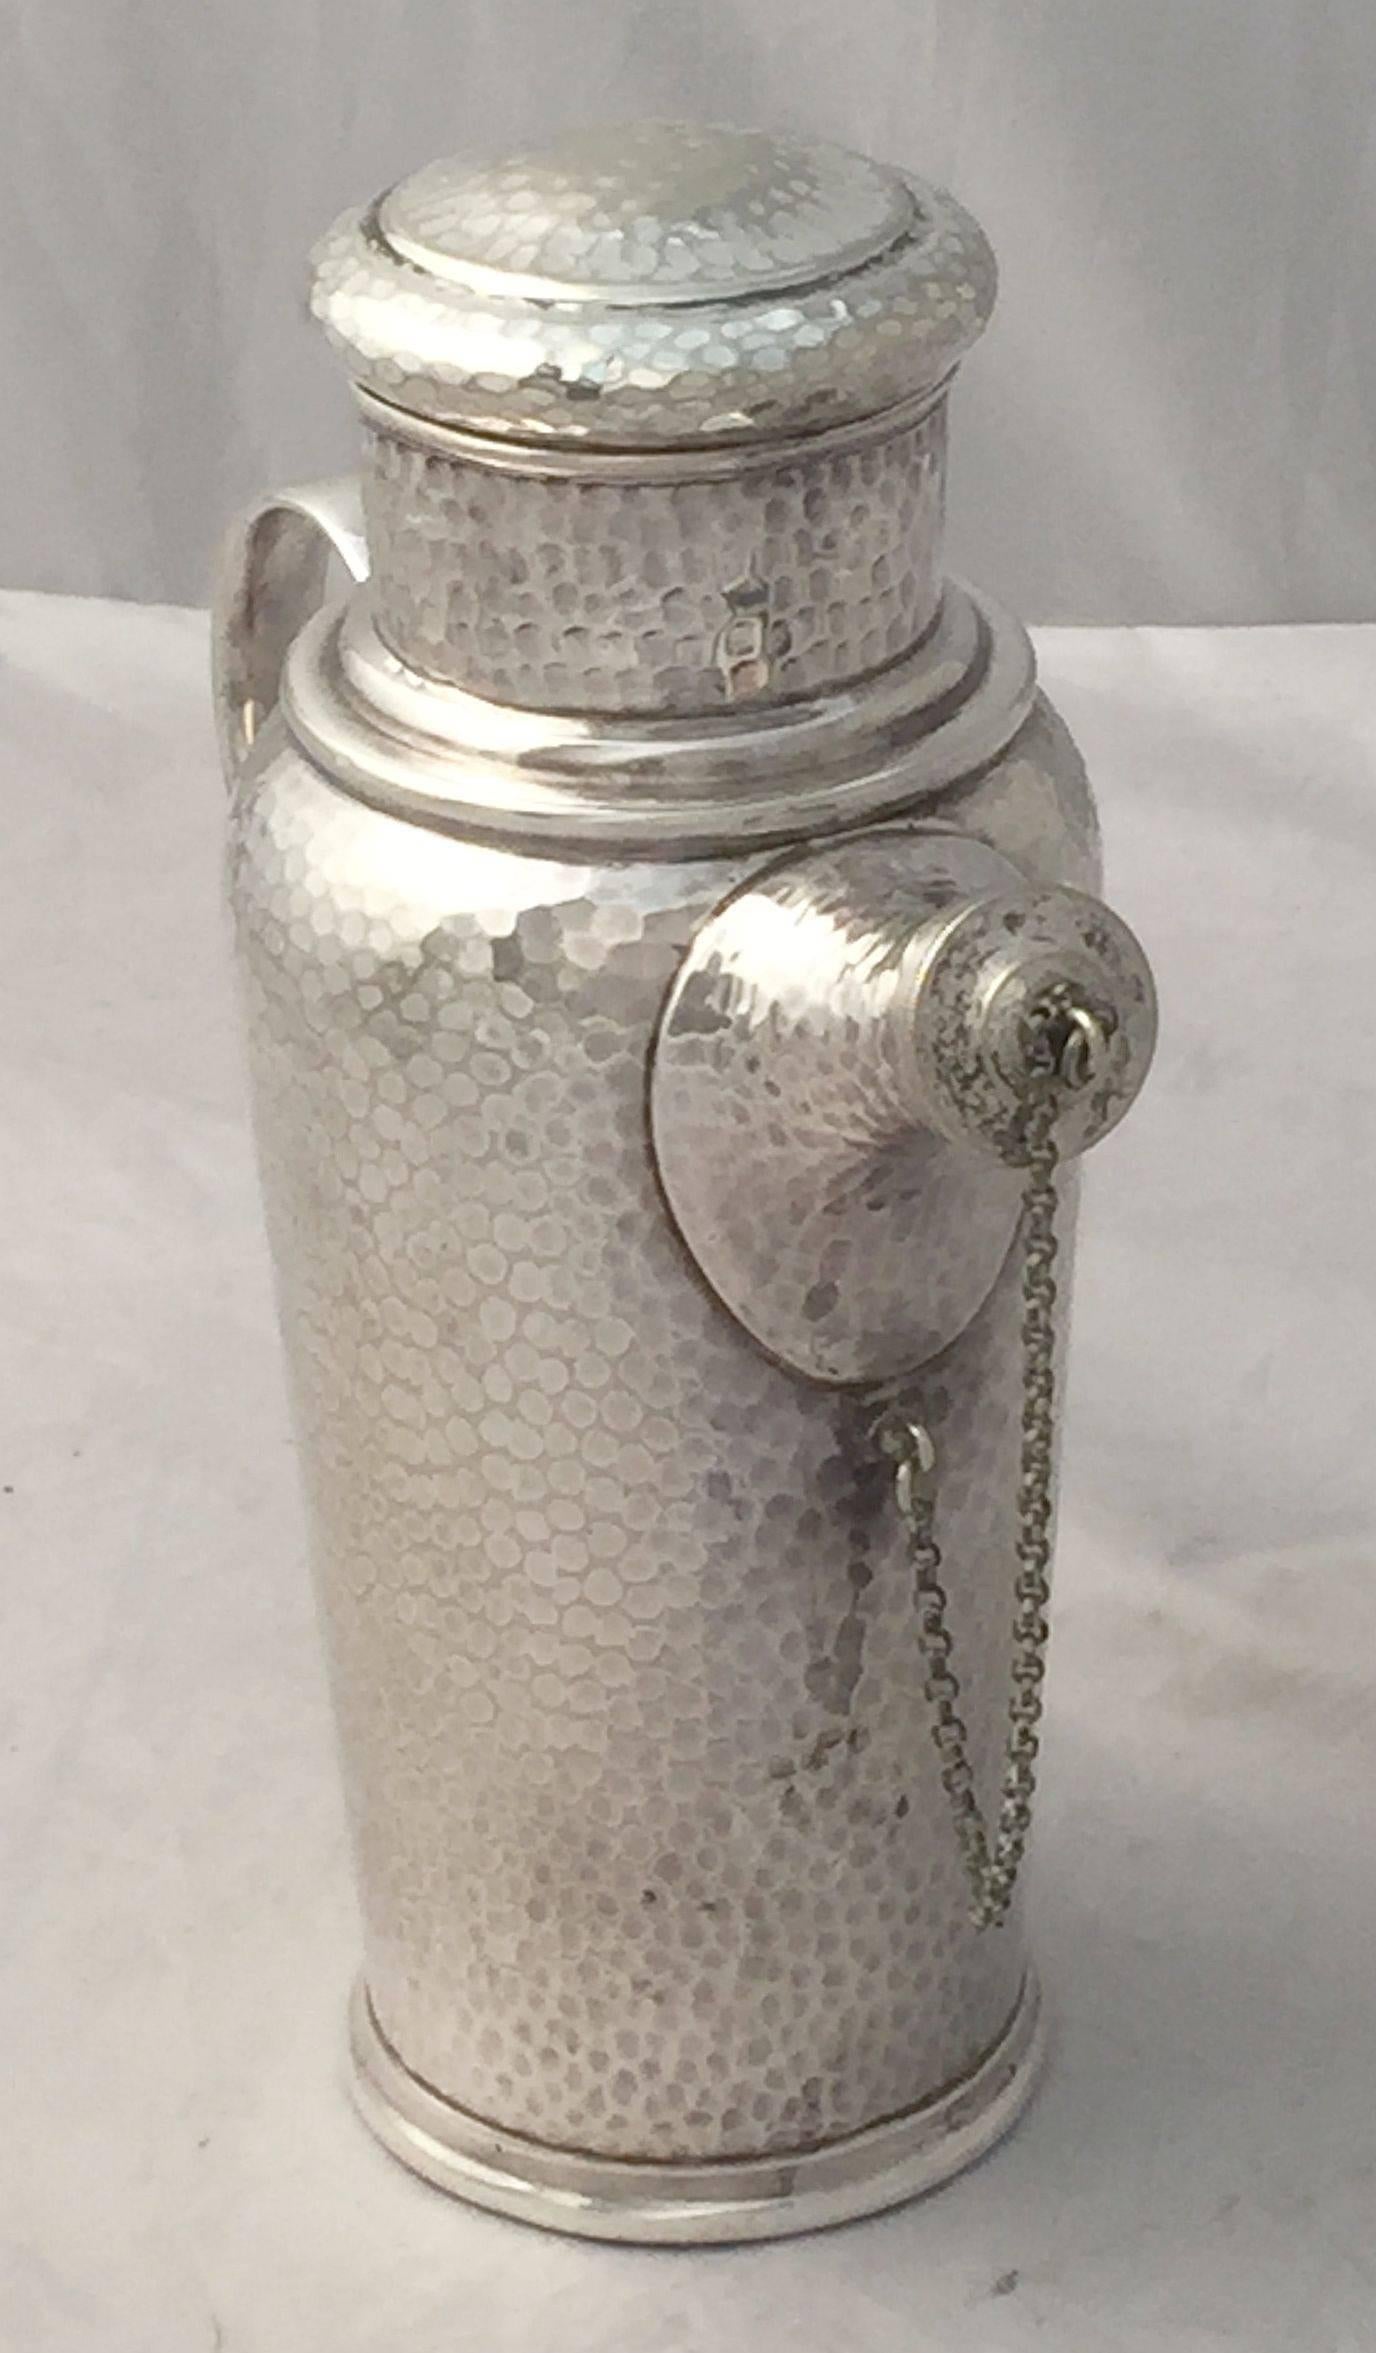 A handsome vintage English cocktail shaker of fine plate silver by William R. Shirtcliffe & Son, Sheffield, featuring a planished or hammered body, with removable corked top, removable corked cap with chain for spout and large handle to